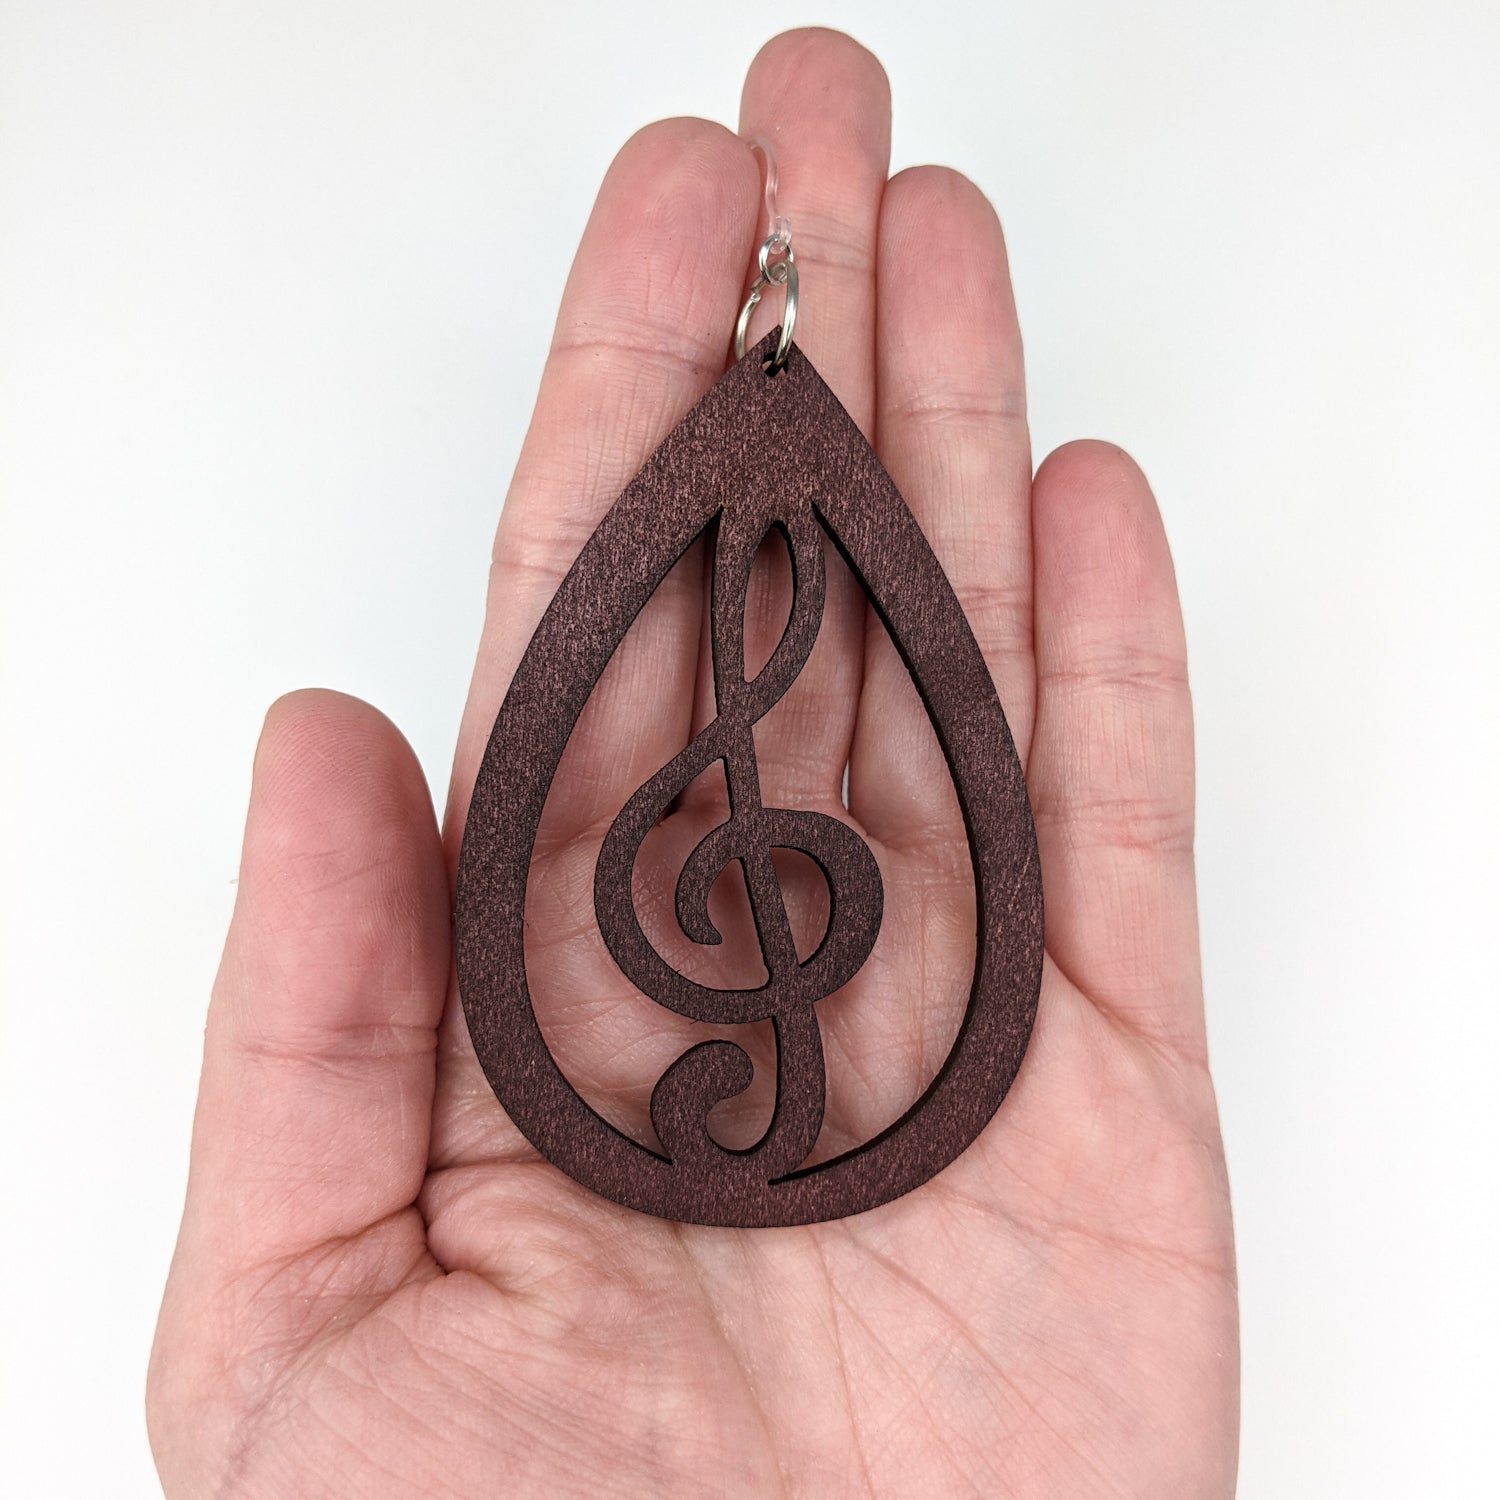 Exaggerated Wooden Treble Clef Earrings (Dangles) - size comparison hand